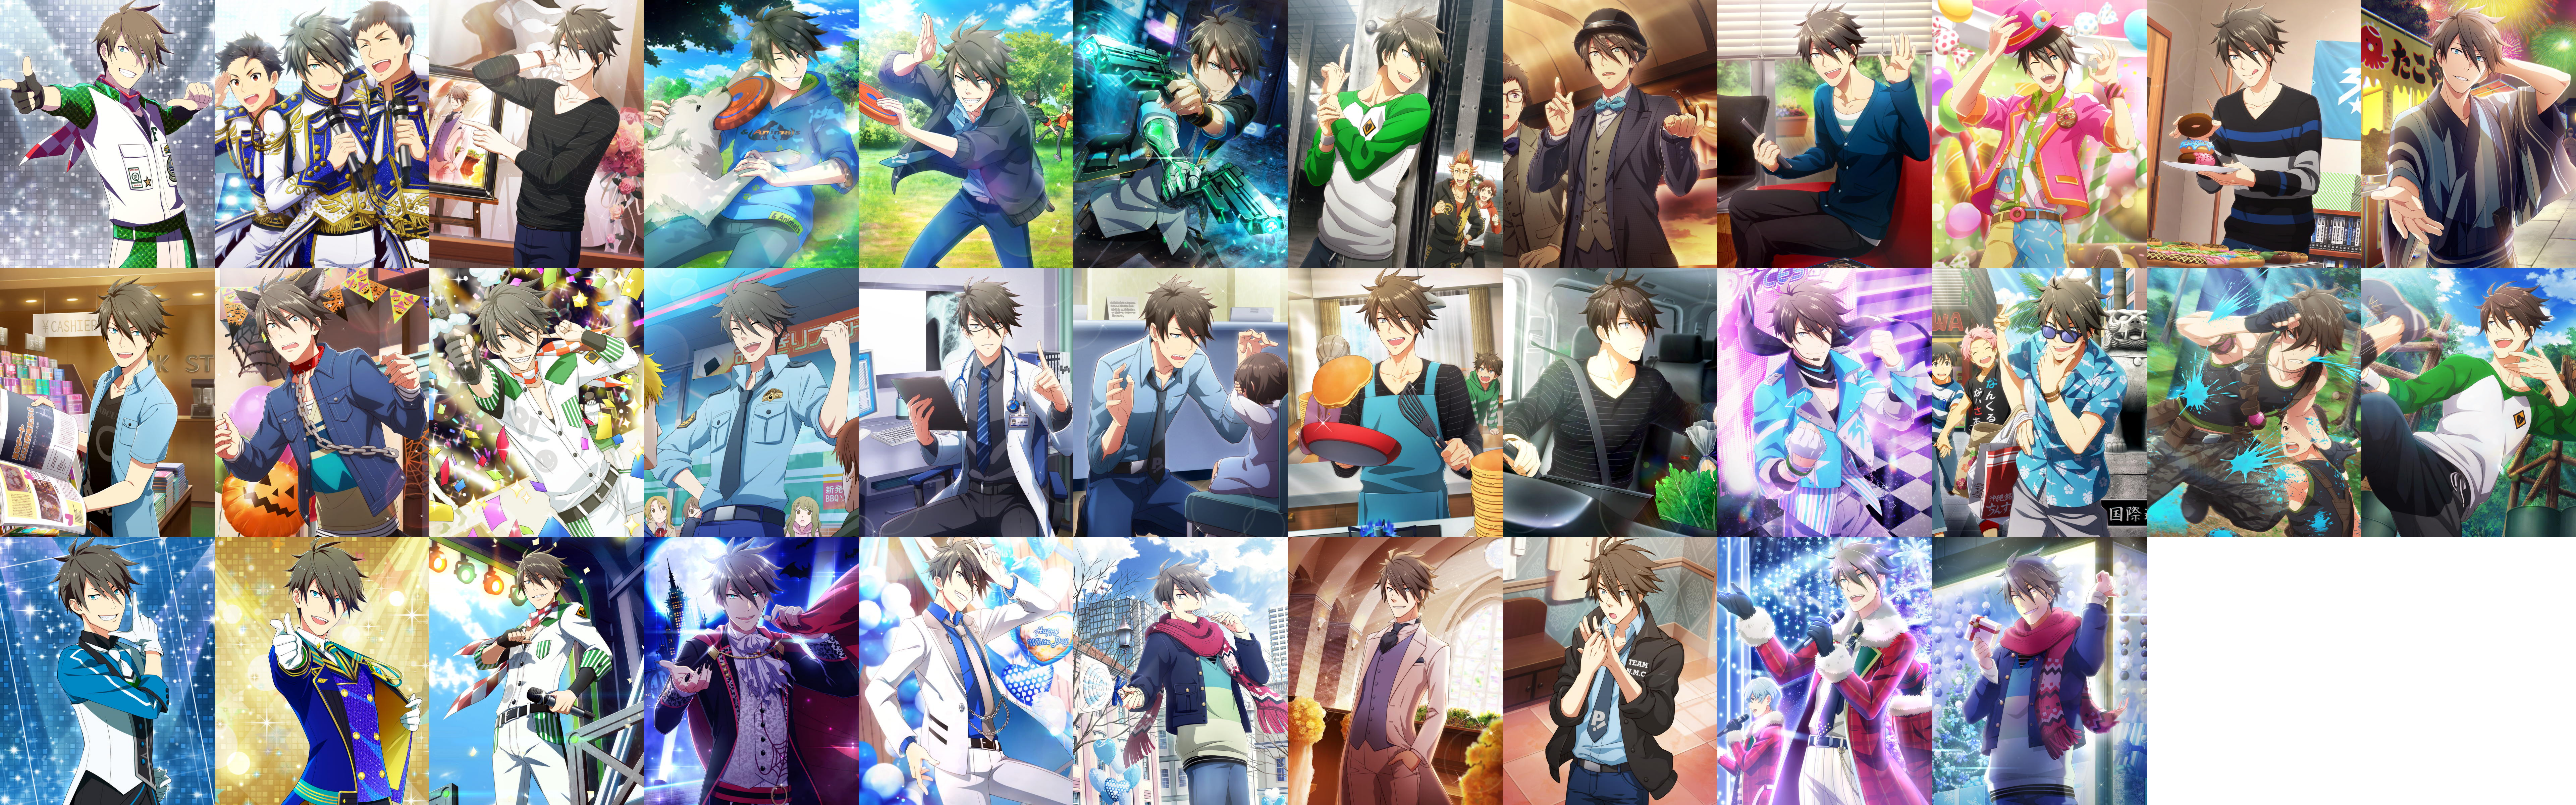 THE iDOLM@STER: SideM - Hideo Akuno